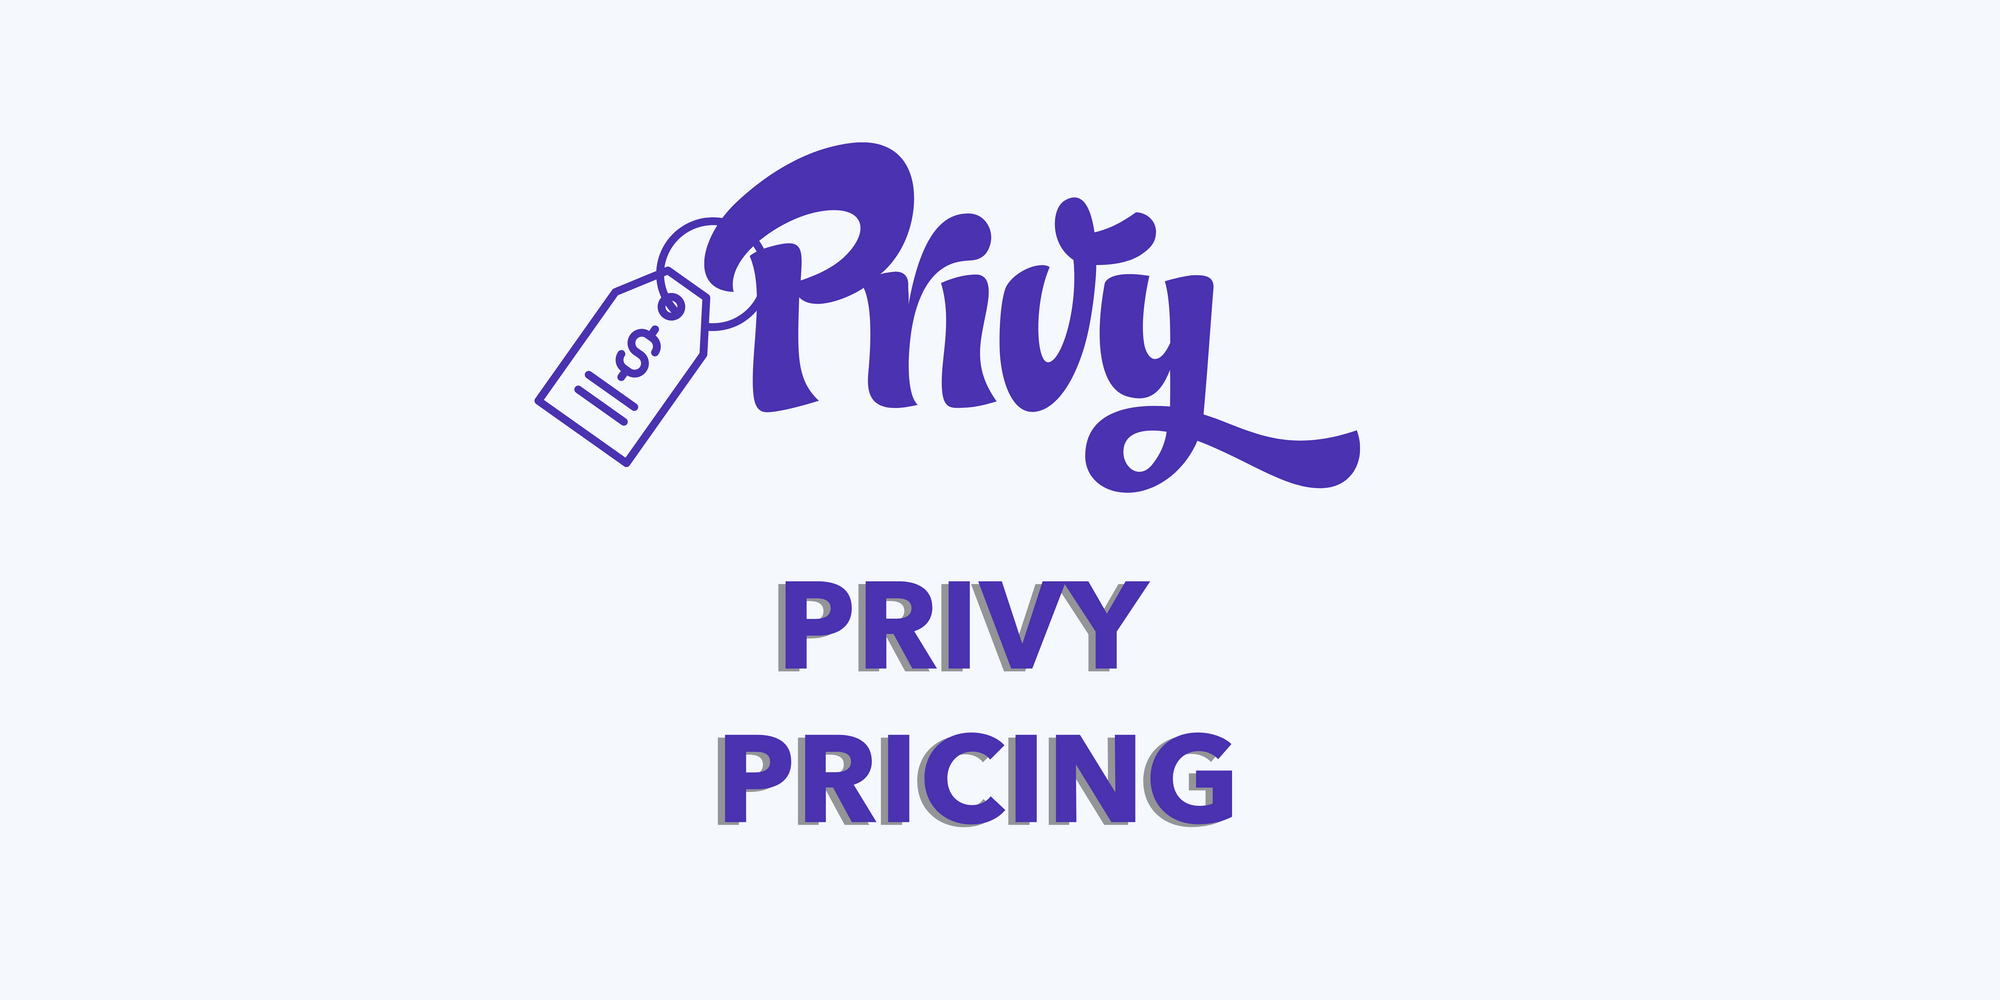 Privy icon with price icon to emphasize the pricing plans on blue background